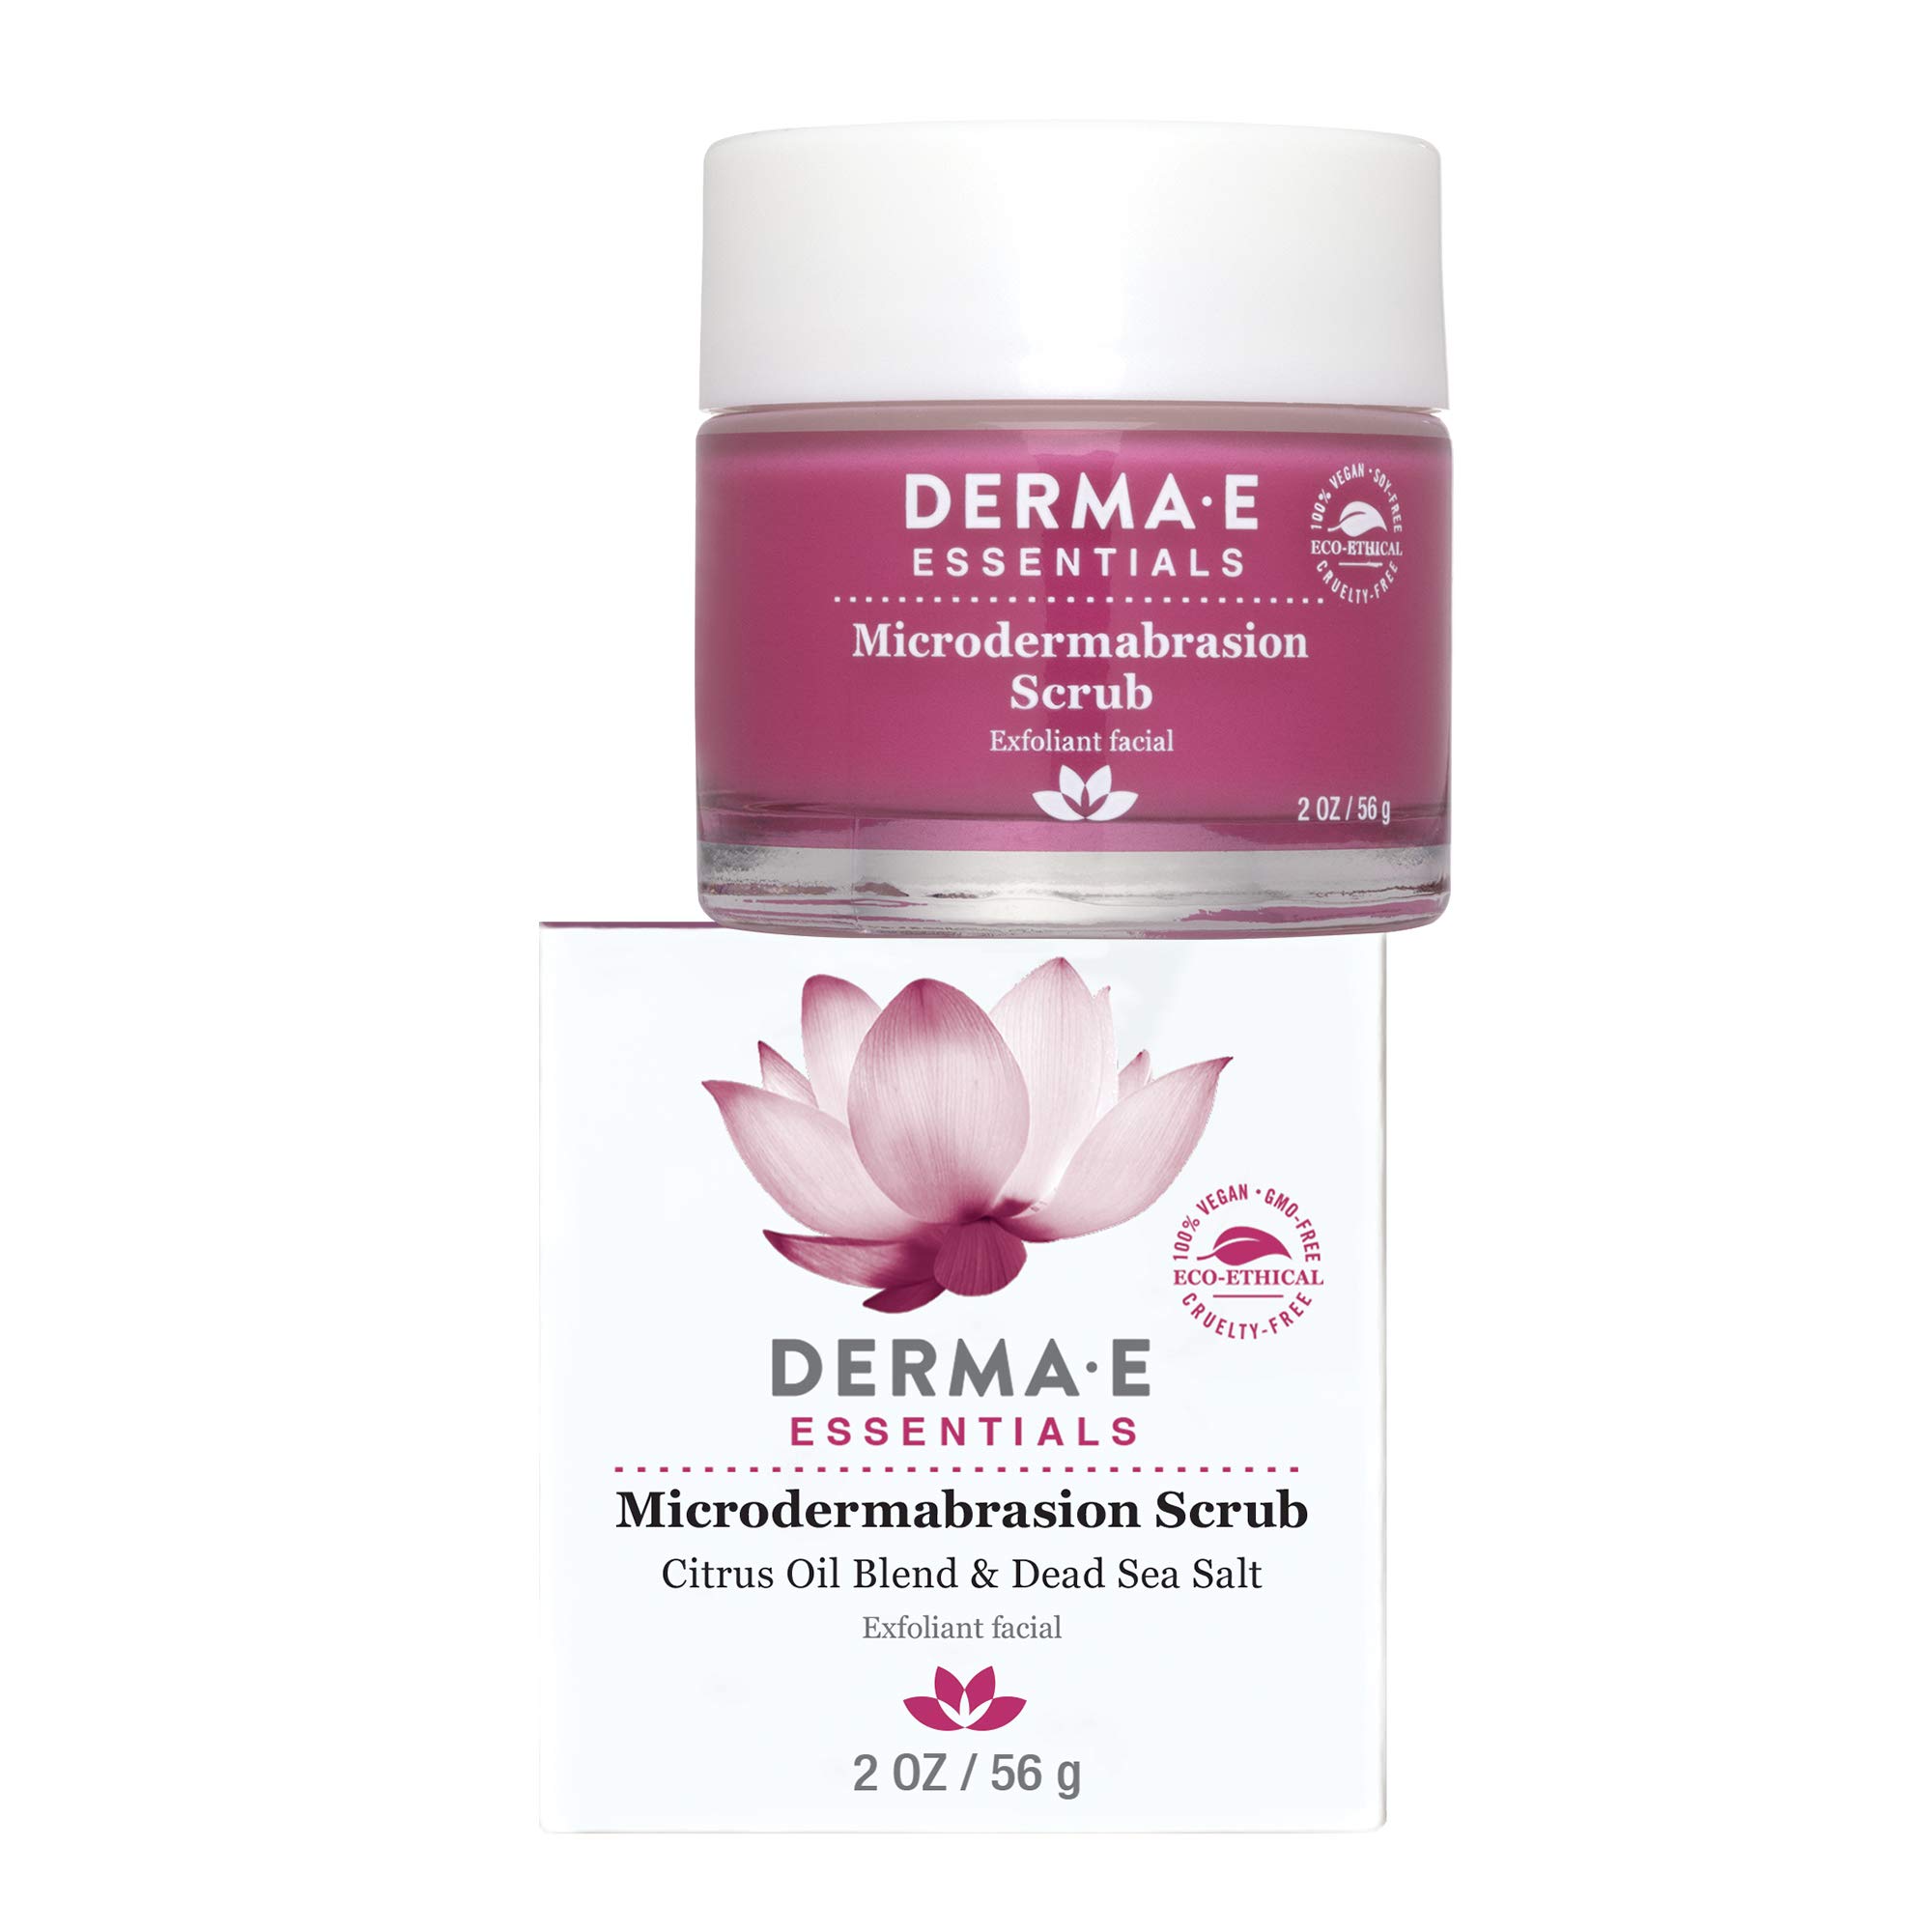 DERMA E Microdermabrasion Scrub with Dead Sea Salt & Citrus Essential Oils – Facial Exfoliating Scrub Smooths, Revitalizes and Renews – Ideal for Scars and Wrinkles, 2oz